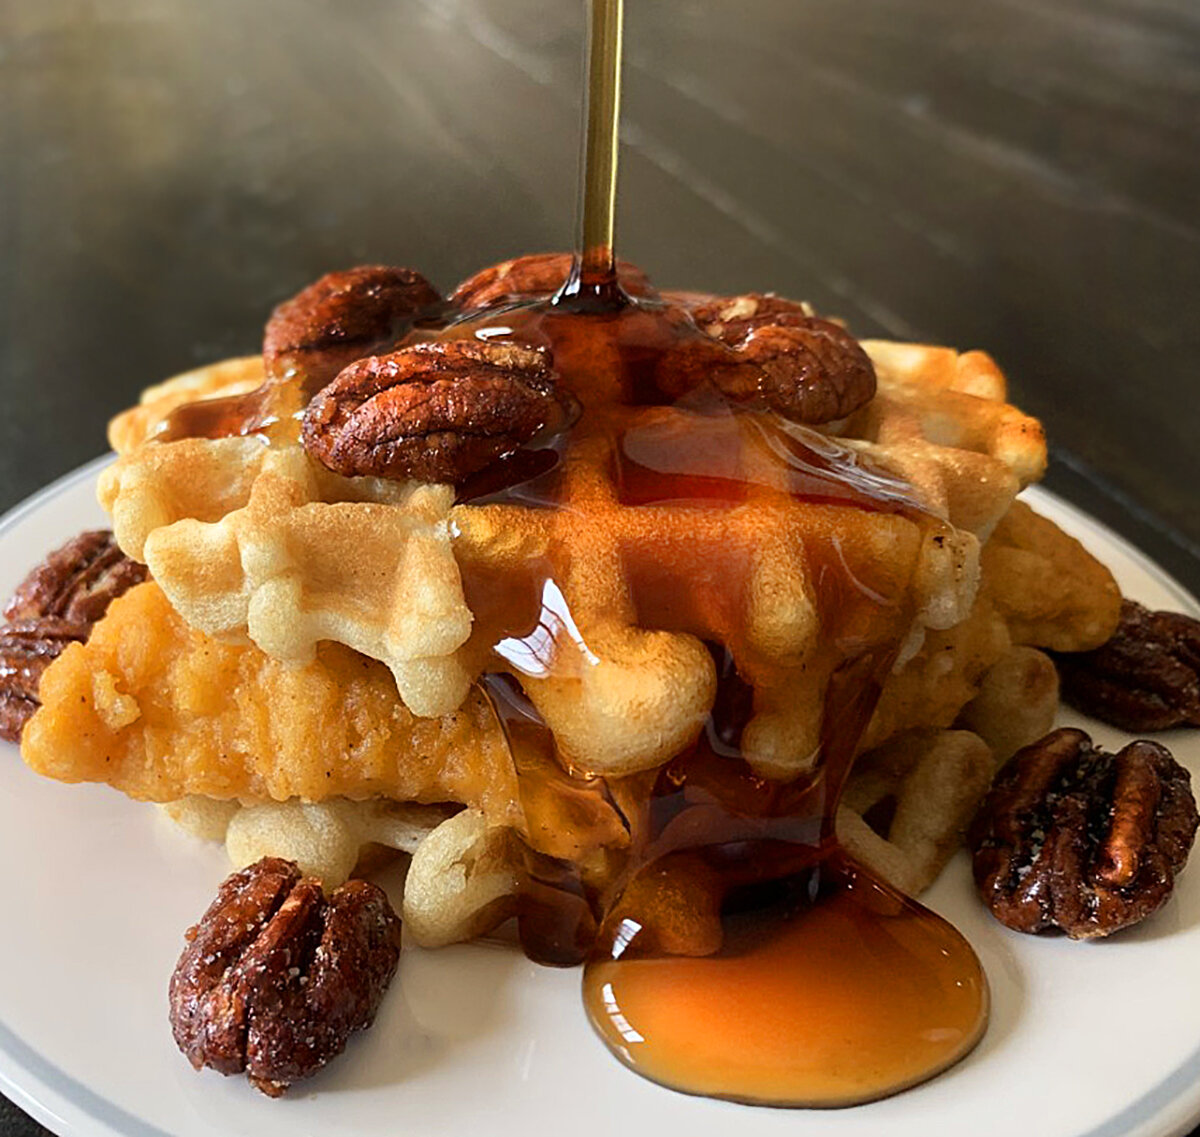 How Do You Eat Chicken and Waffles?